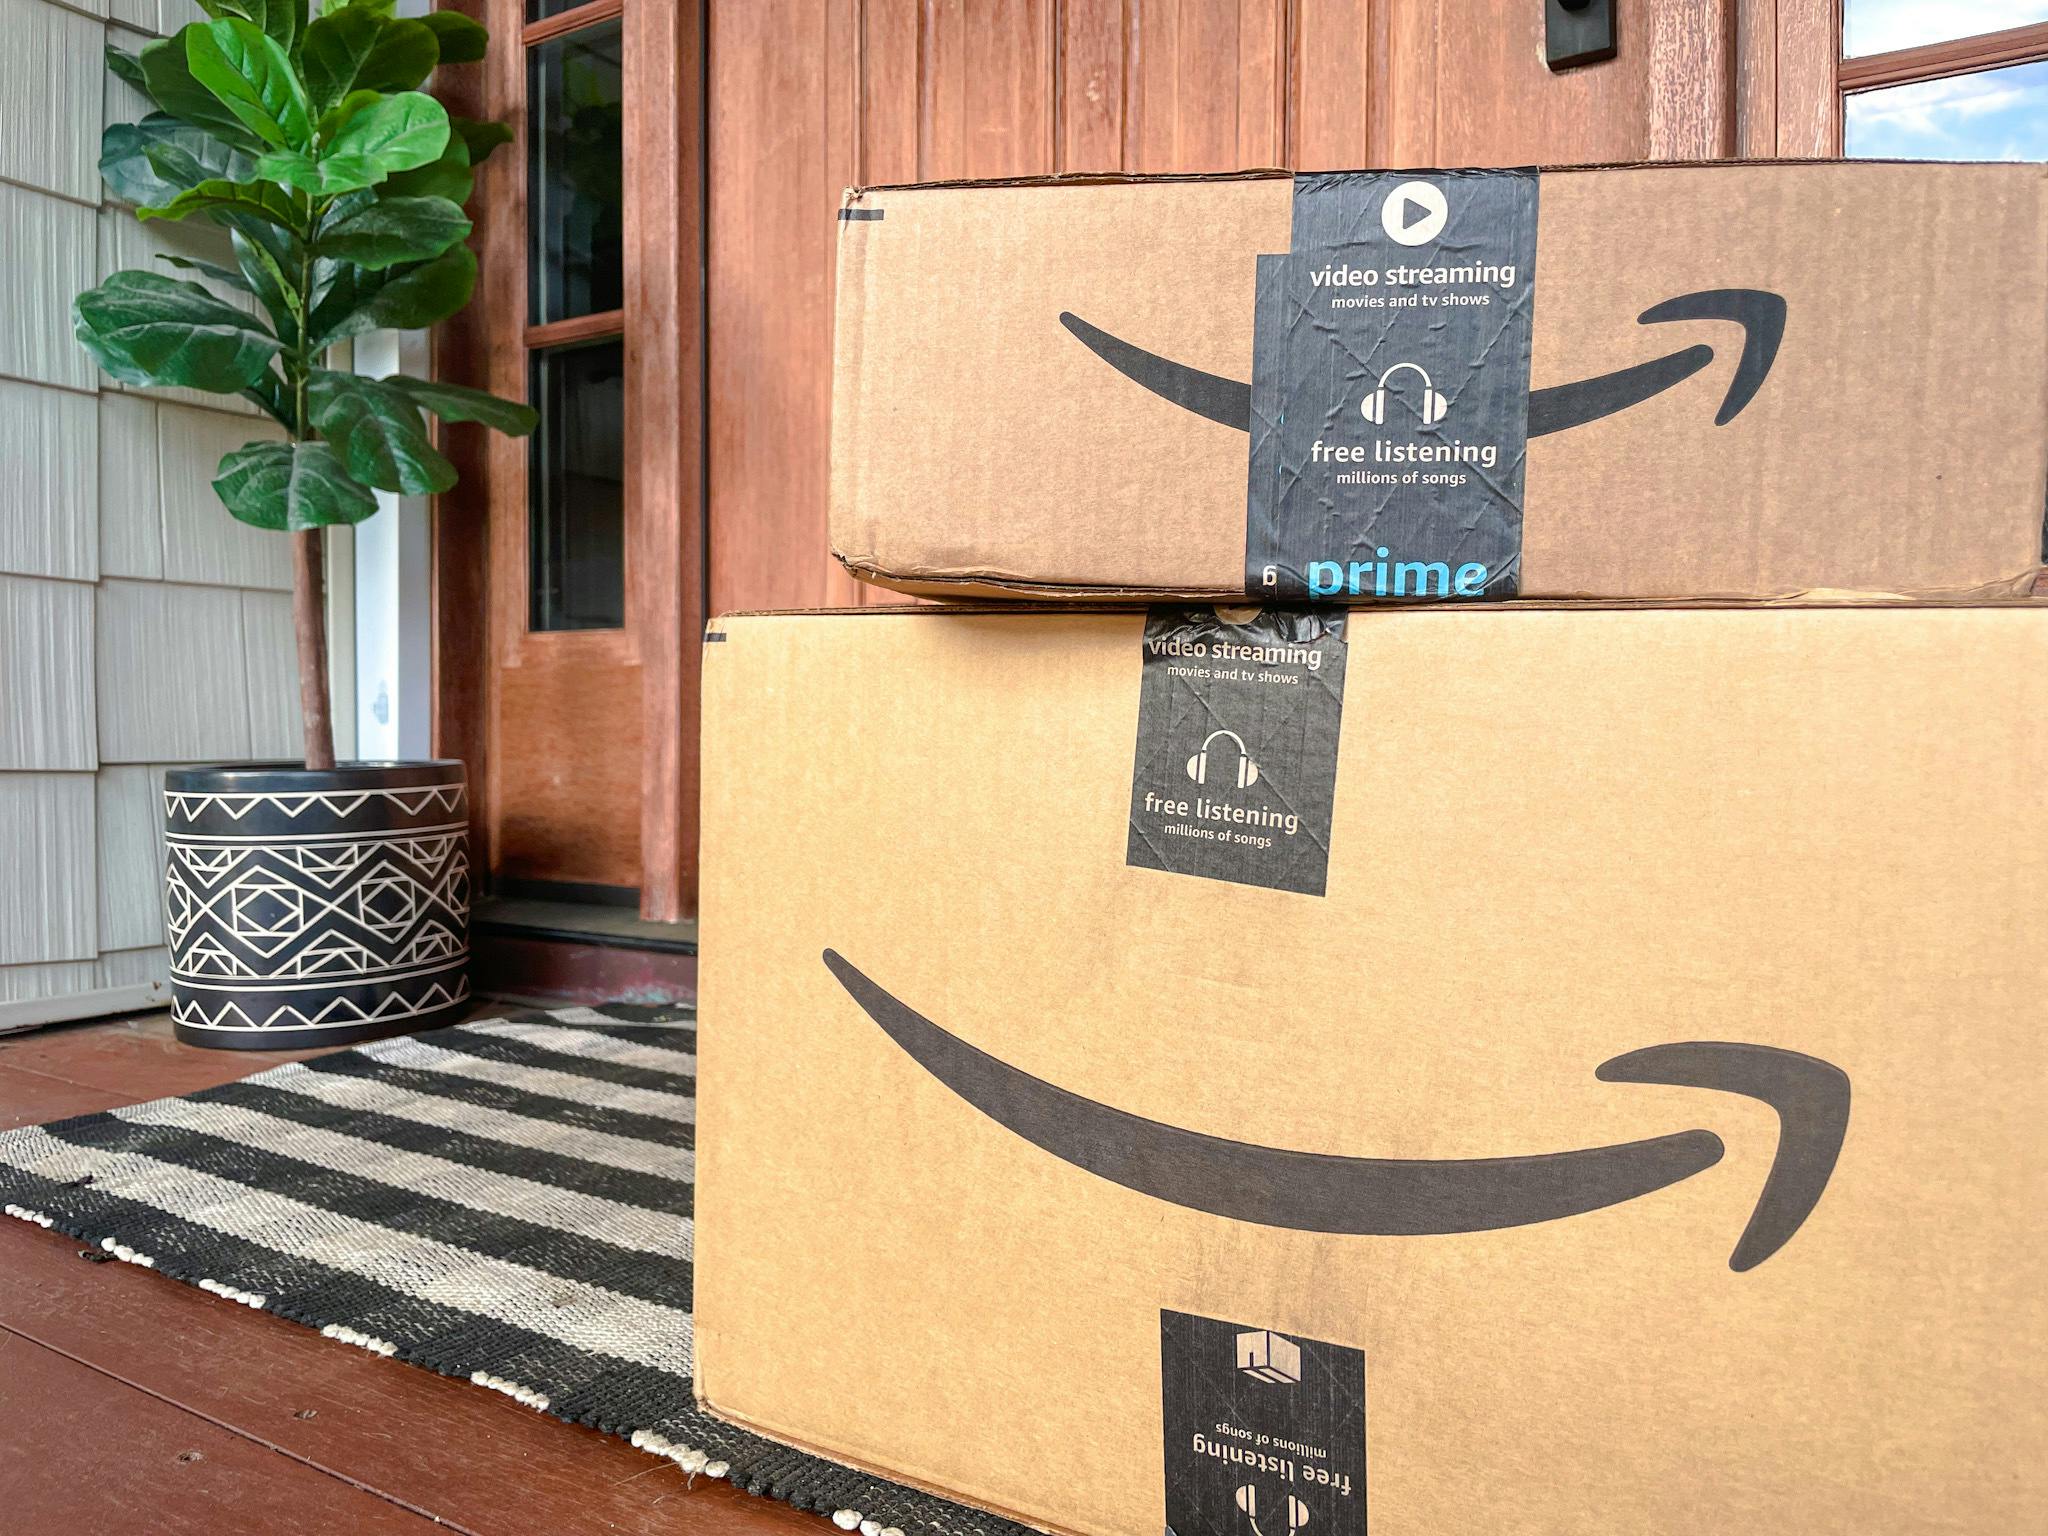 amazon delivery status updated too soon